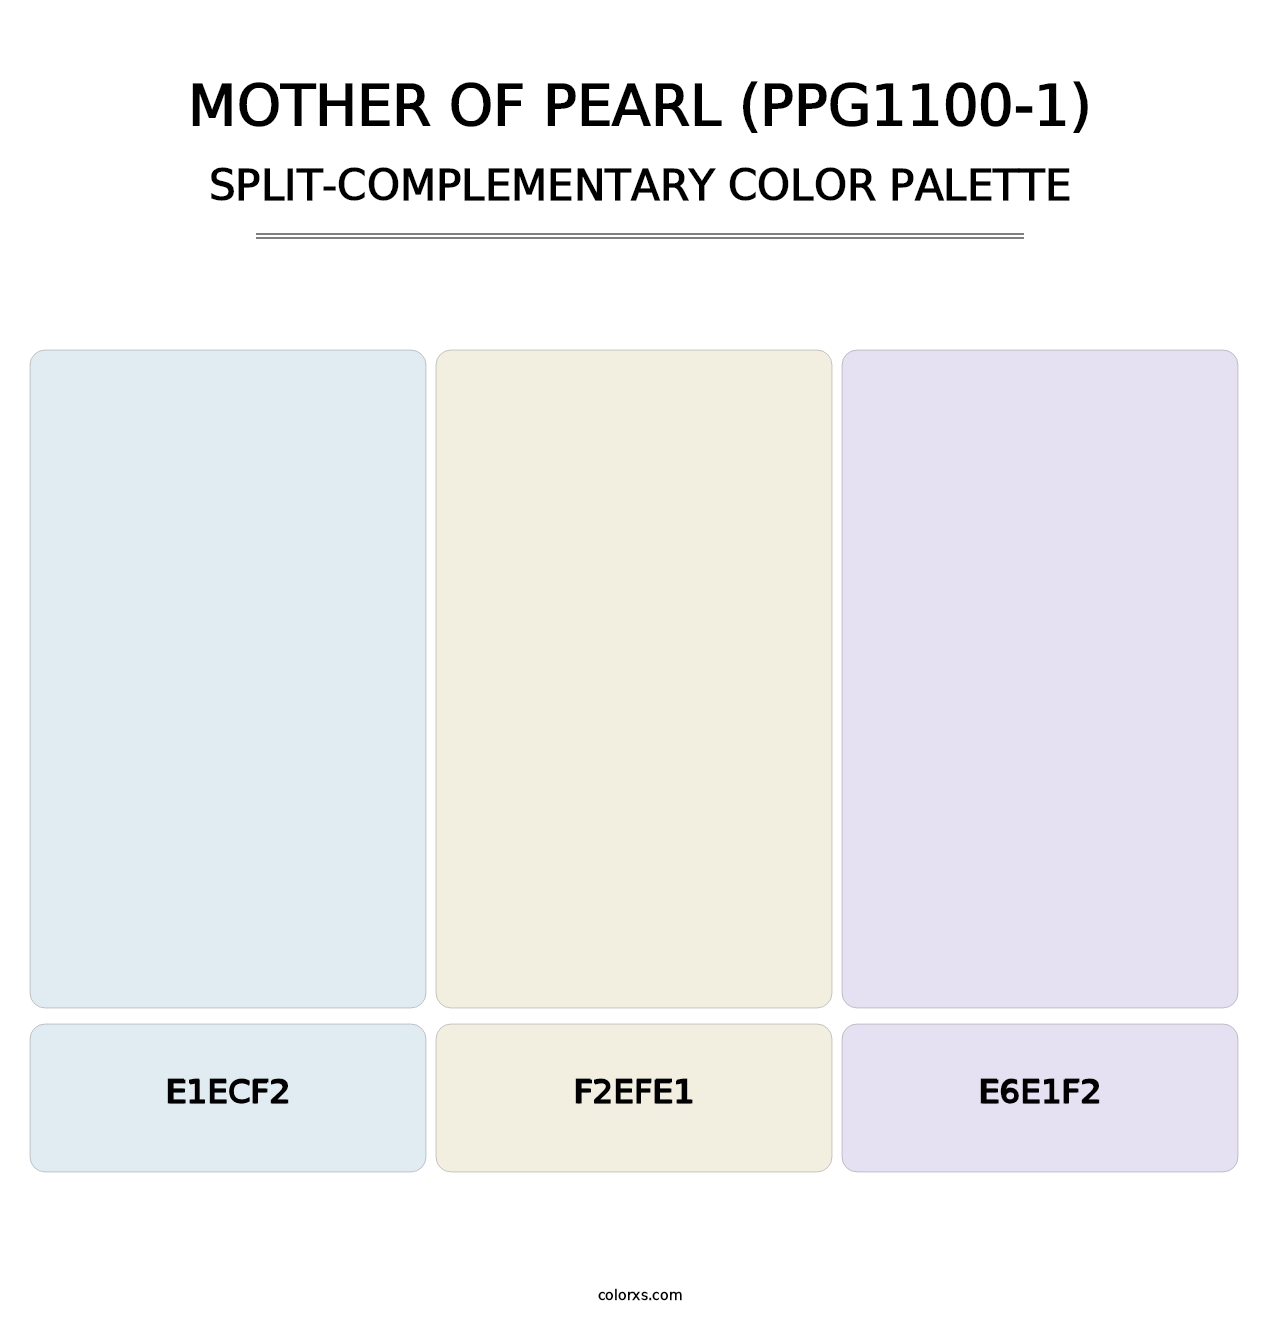 Mother Of Pearl (PPG1100-1) - Split-Complementary Color Palette